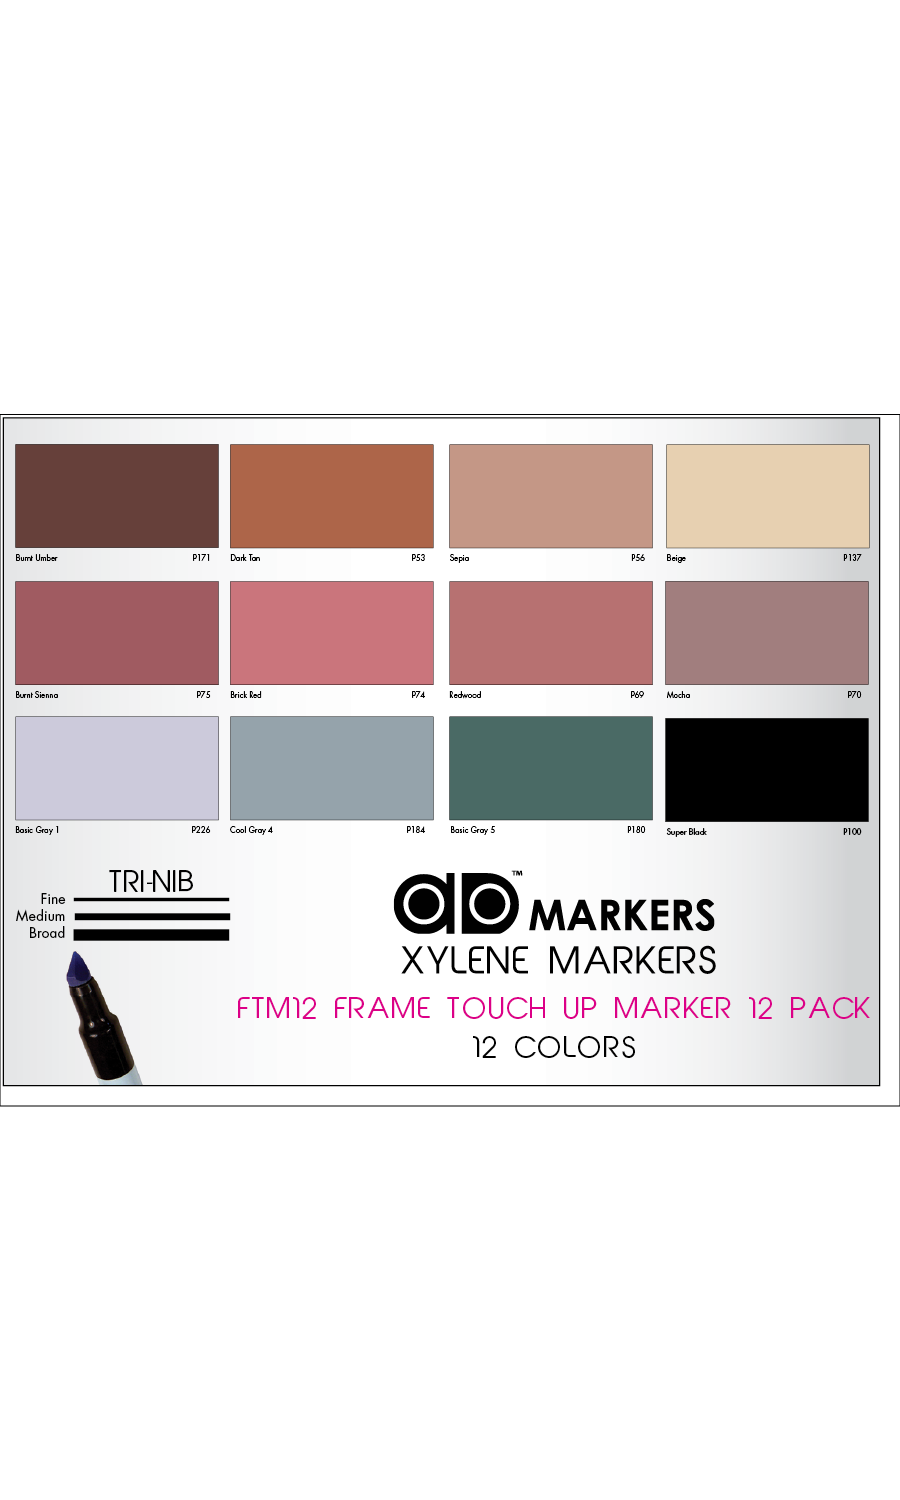 FRAME TOUCH UP MARKER-12 PACK